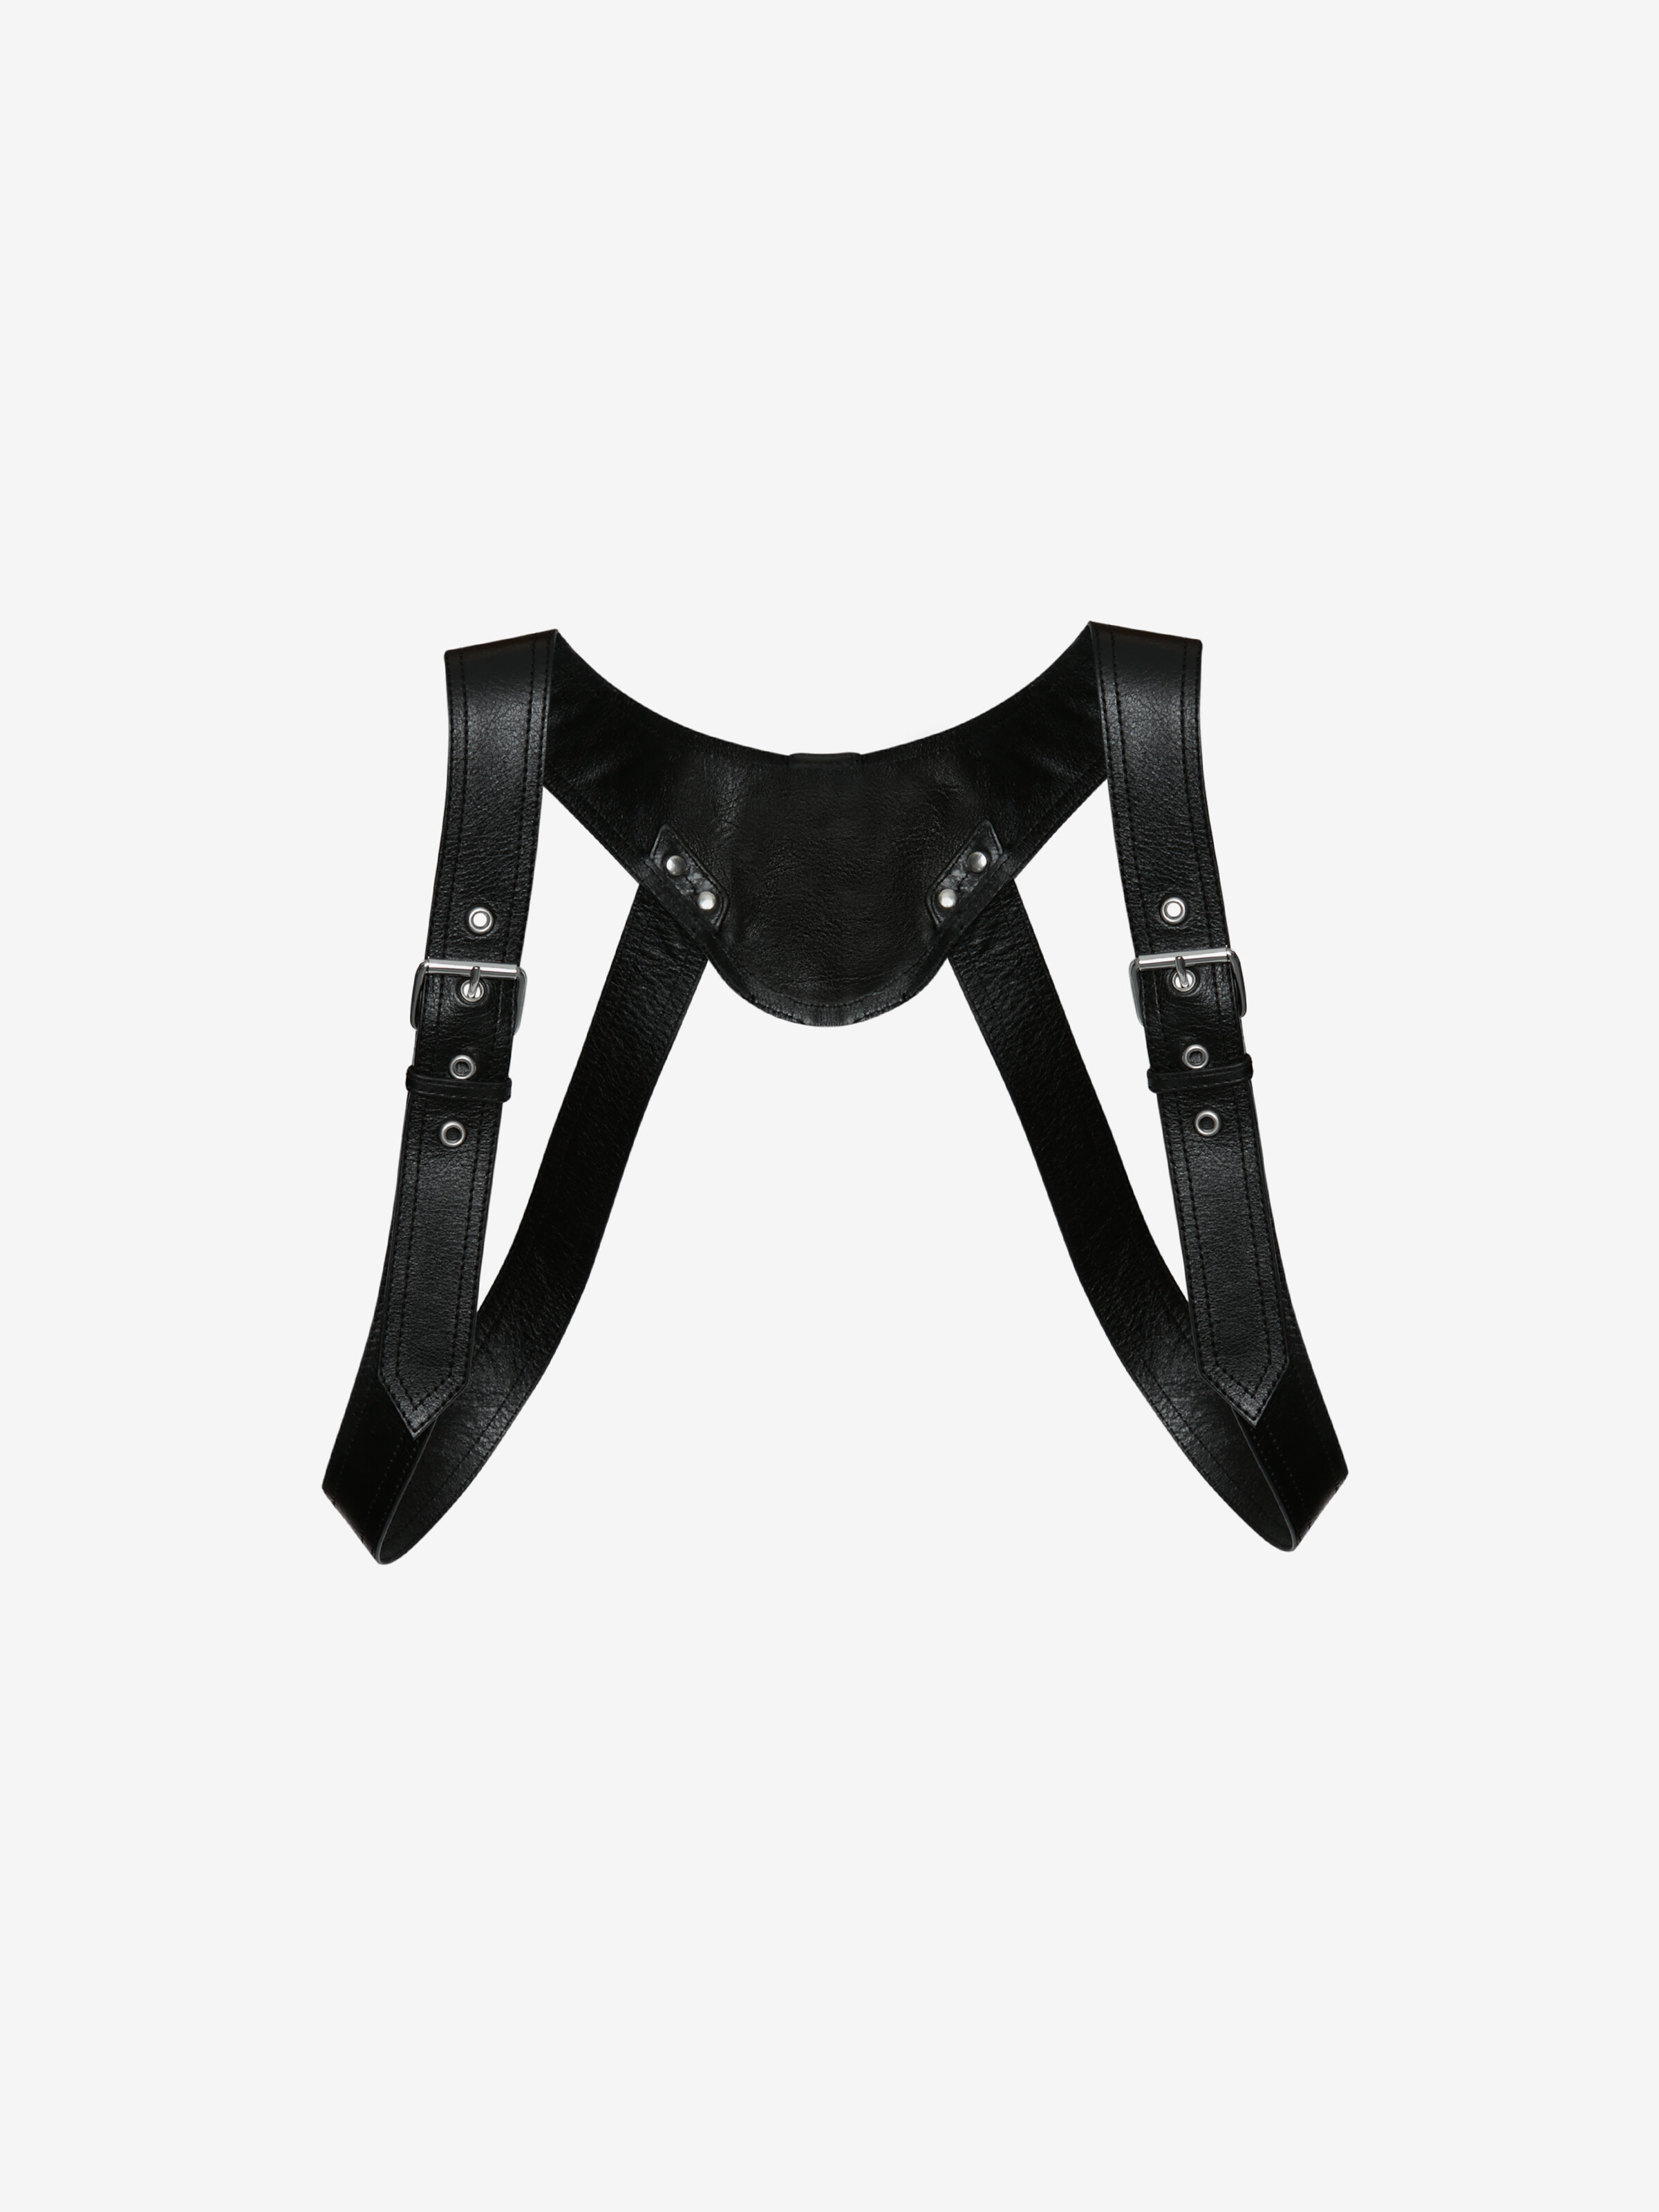 100 Leather Harness - Mens ideas  leather harness, mens fashion, leather